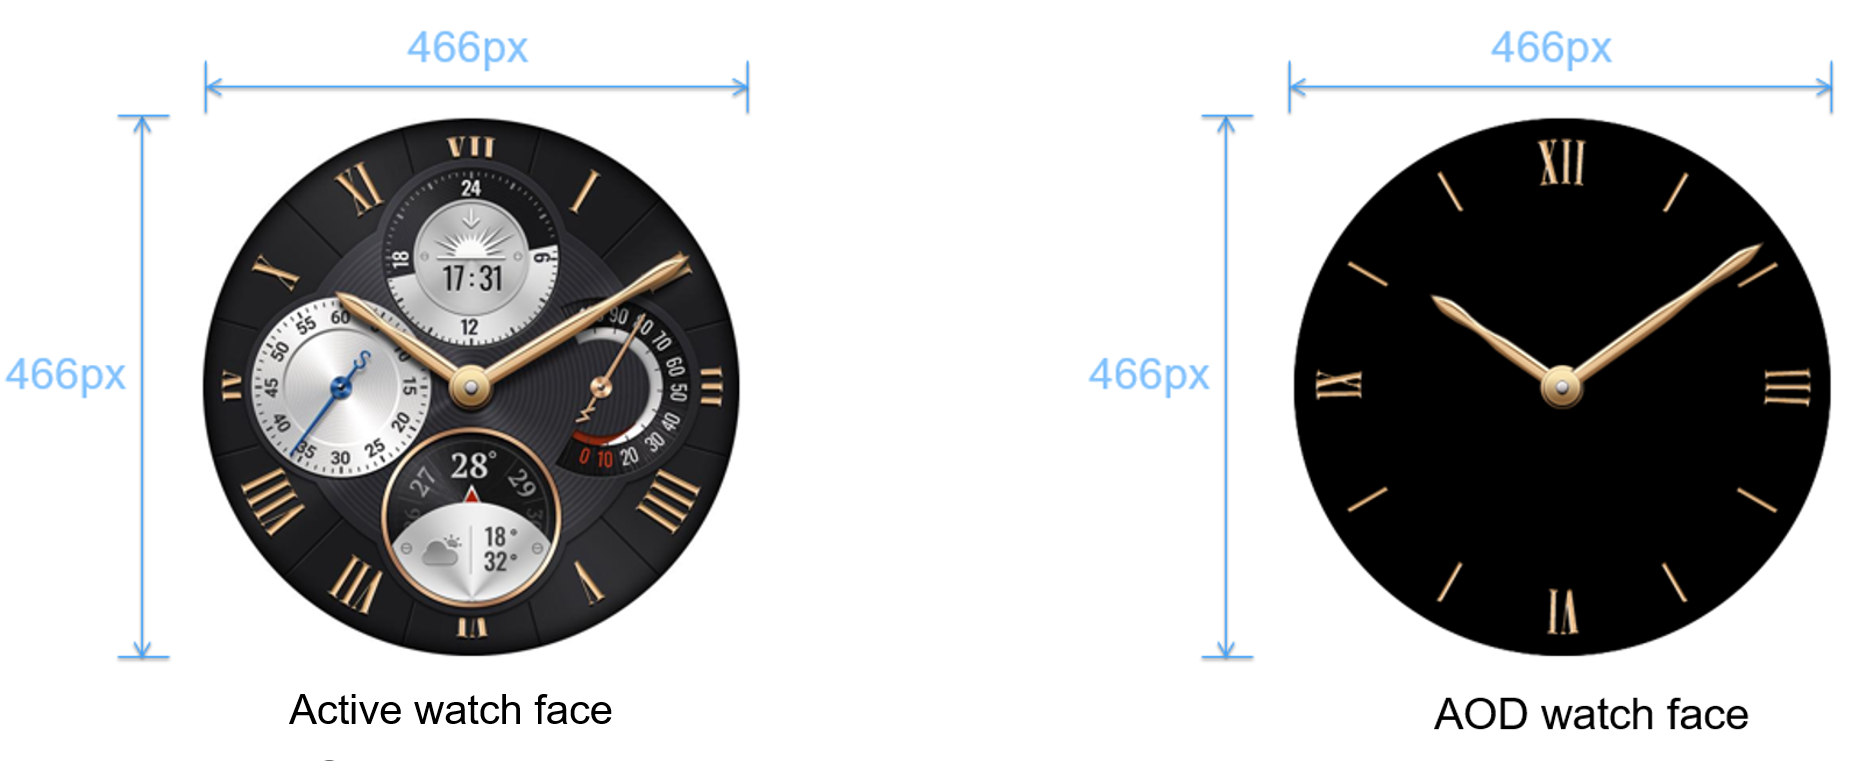 HUAWEI WATCH Series Watch Face Design Guide and Specifications-Smart Watch- Watch Face Themes-Development Guide-HUAWEI Themes | HUAWEI Developers